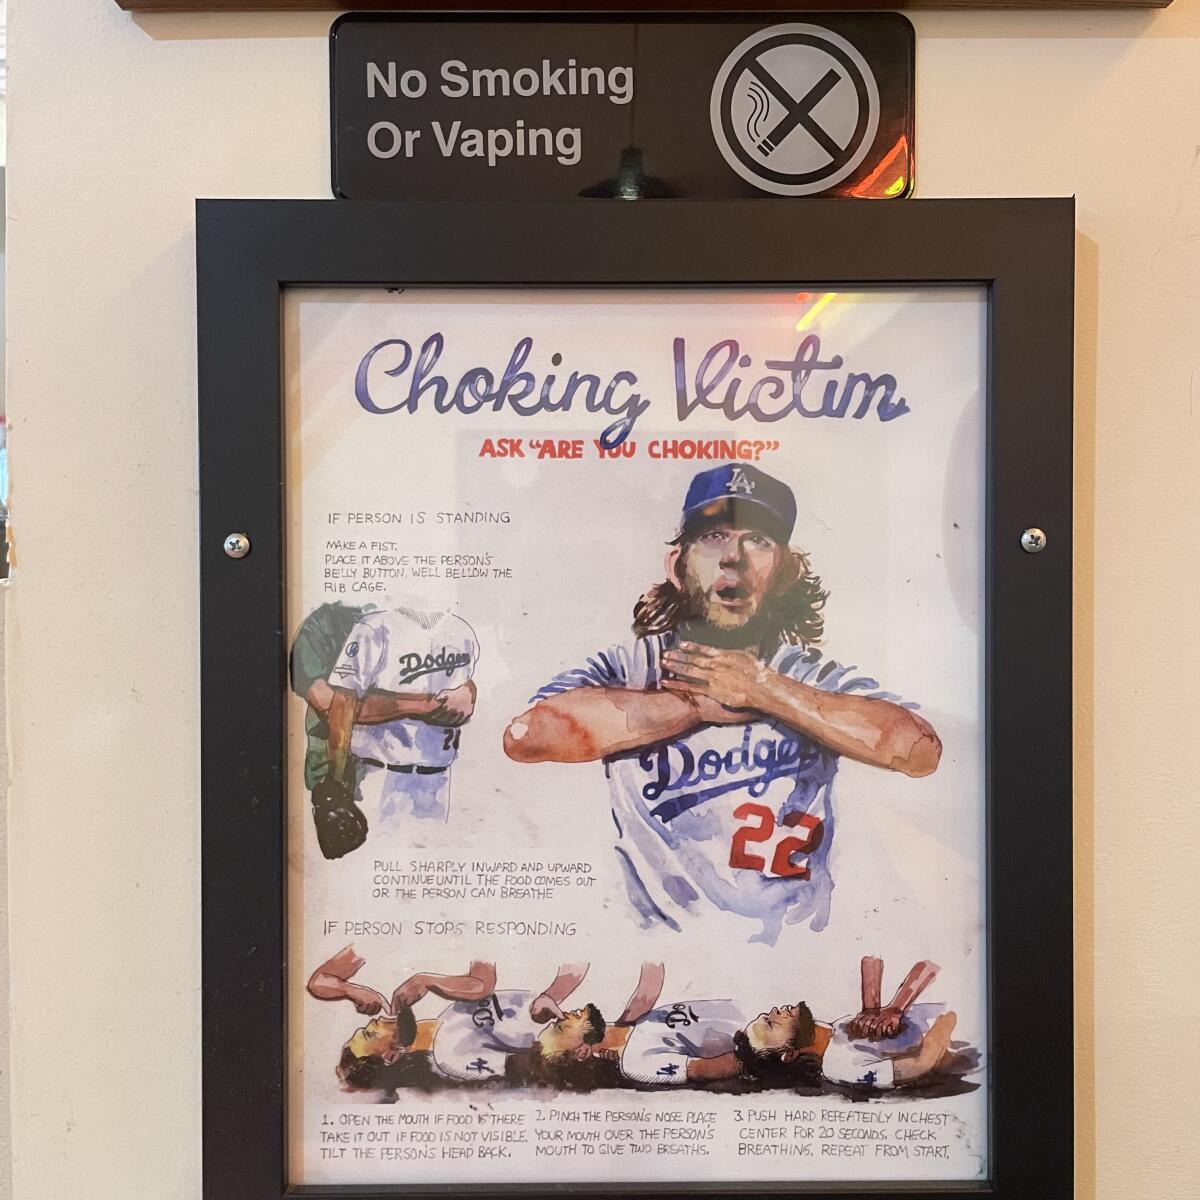 A first aid poster depicting Dodgers pitcher Clayton Kershaw as a suffocation victim.